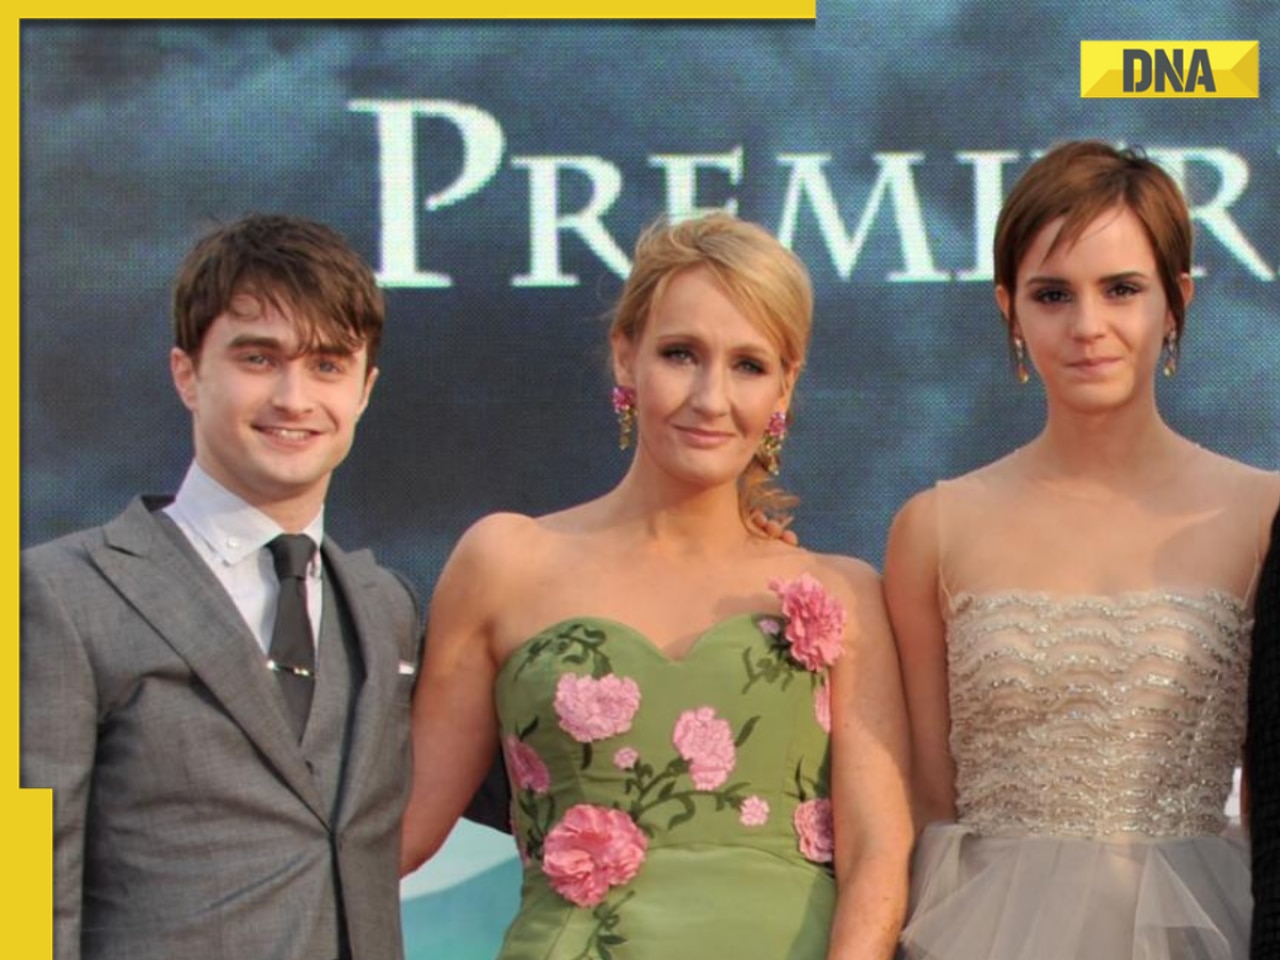 JK Rowling lashes out at Harry Potter stars Daniel Radcliffe, Emma Watson over transgender comments, won't forgive them